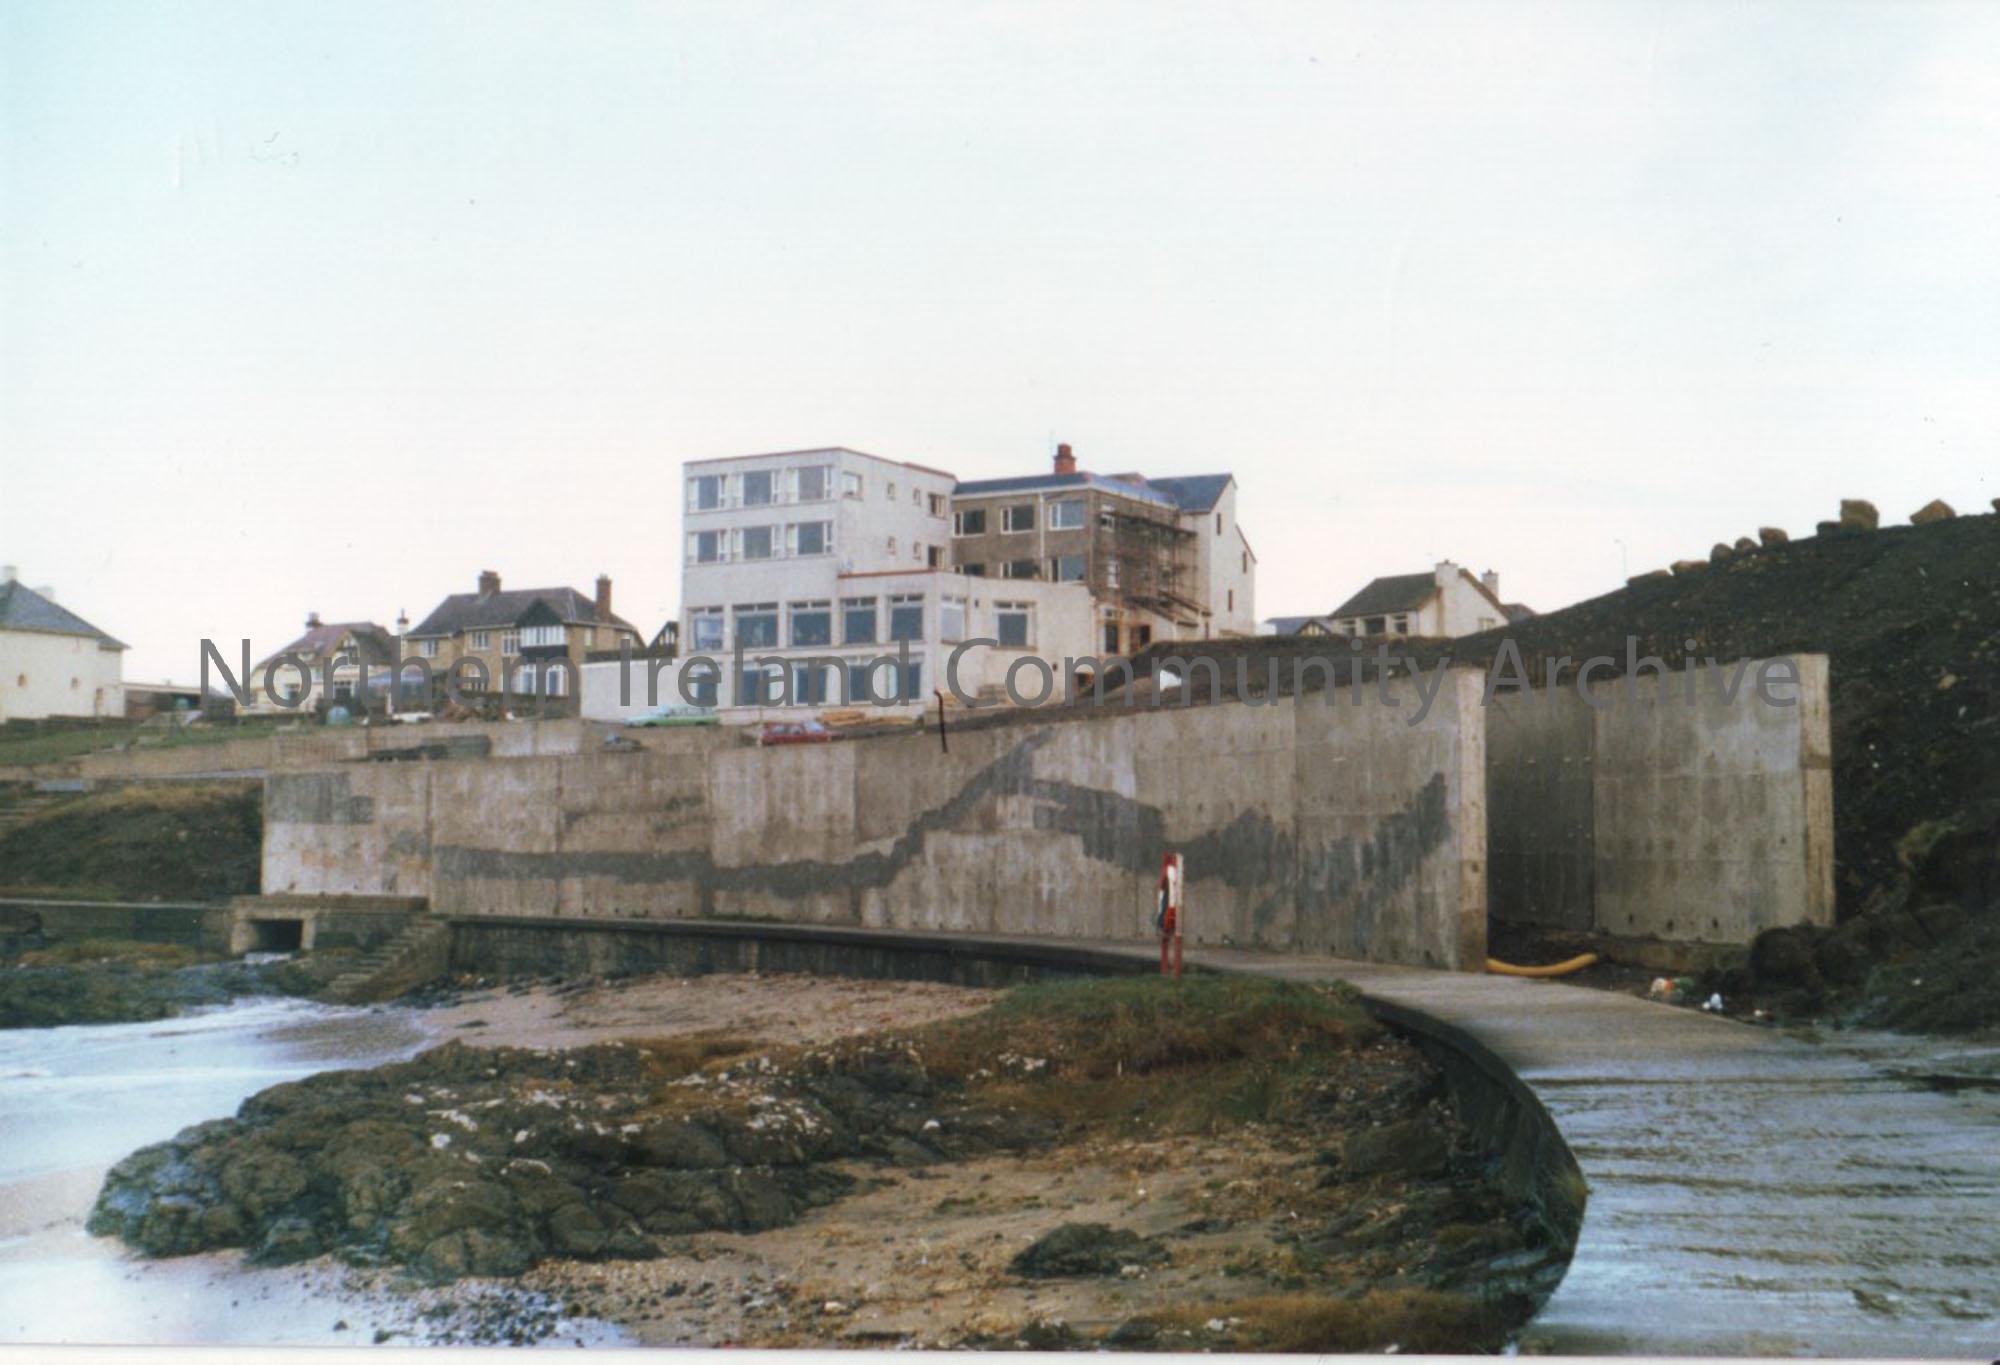 ‘The Wall’ at Portstewart, along the cliff path before demolition in 1986